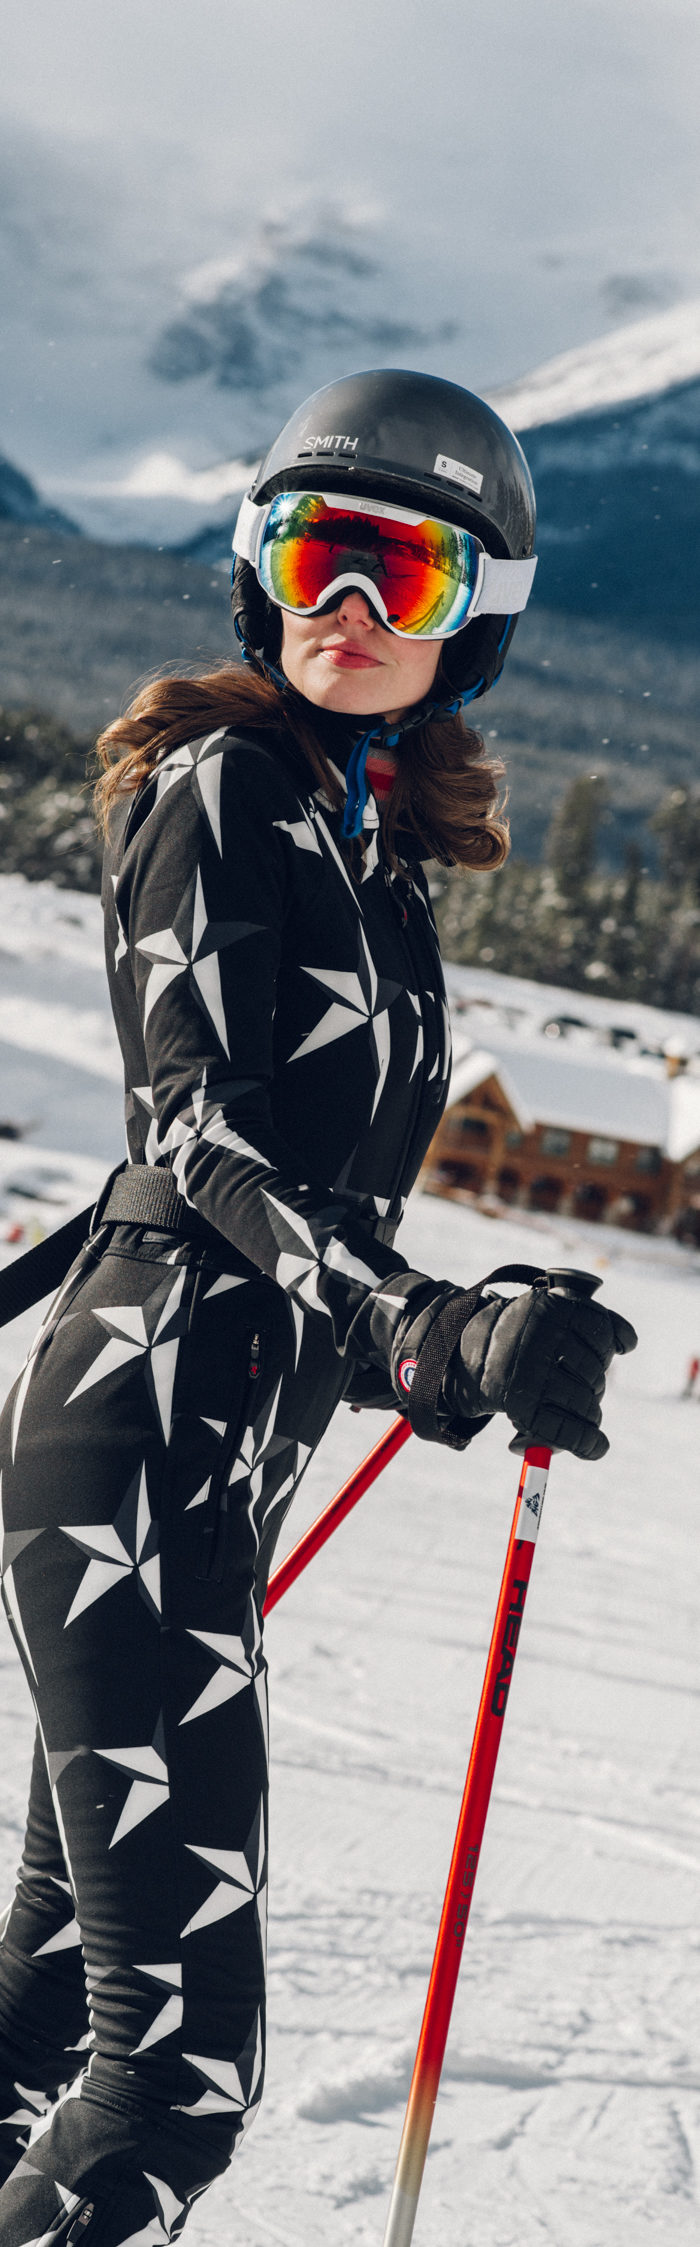 Alyssa Campanella of The A List blog experiences romance in the snow with her husband by skiing in Lake Louise, Alberta, Canada wearing Perfect Moment Star Ski Suit